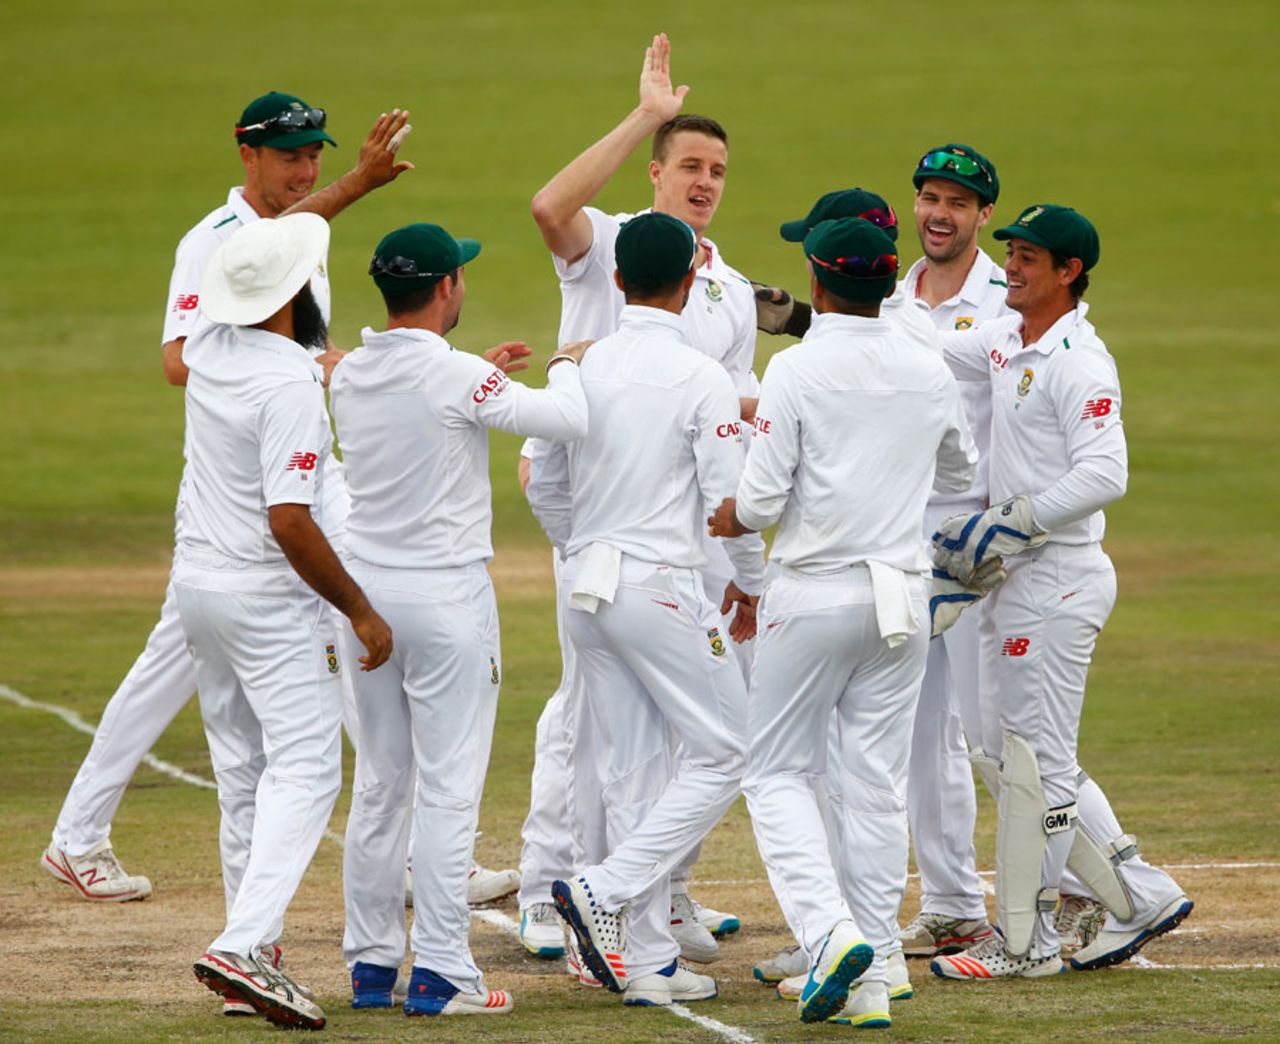 Morne Morkel removed Alastair Cook, South Africa v England, 4th Test, Centurion, 4th day, January 25, 2016